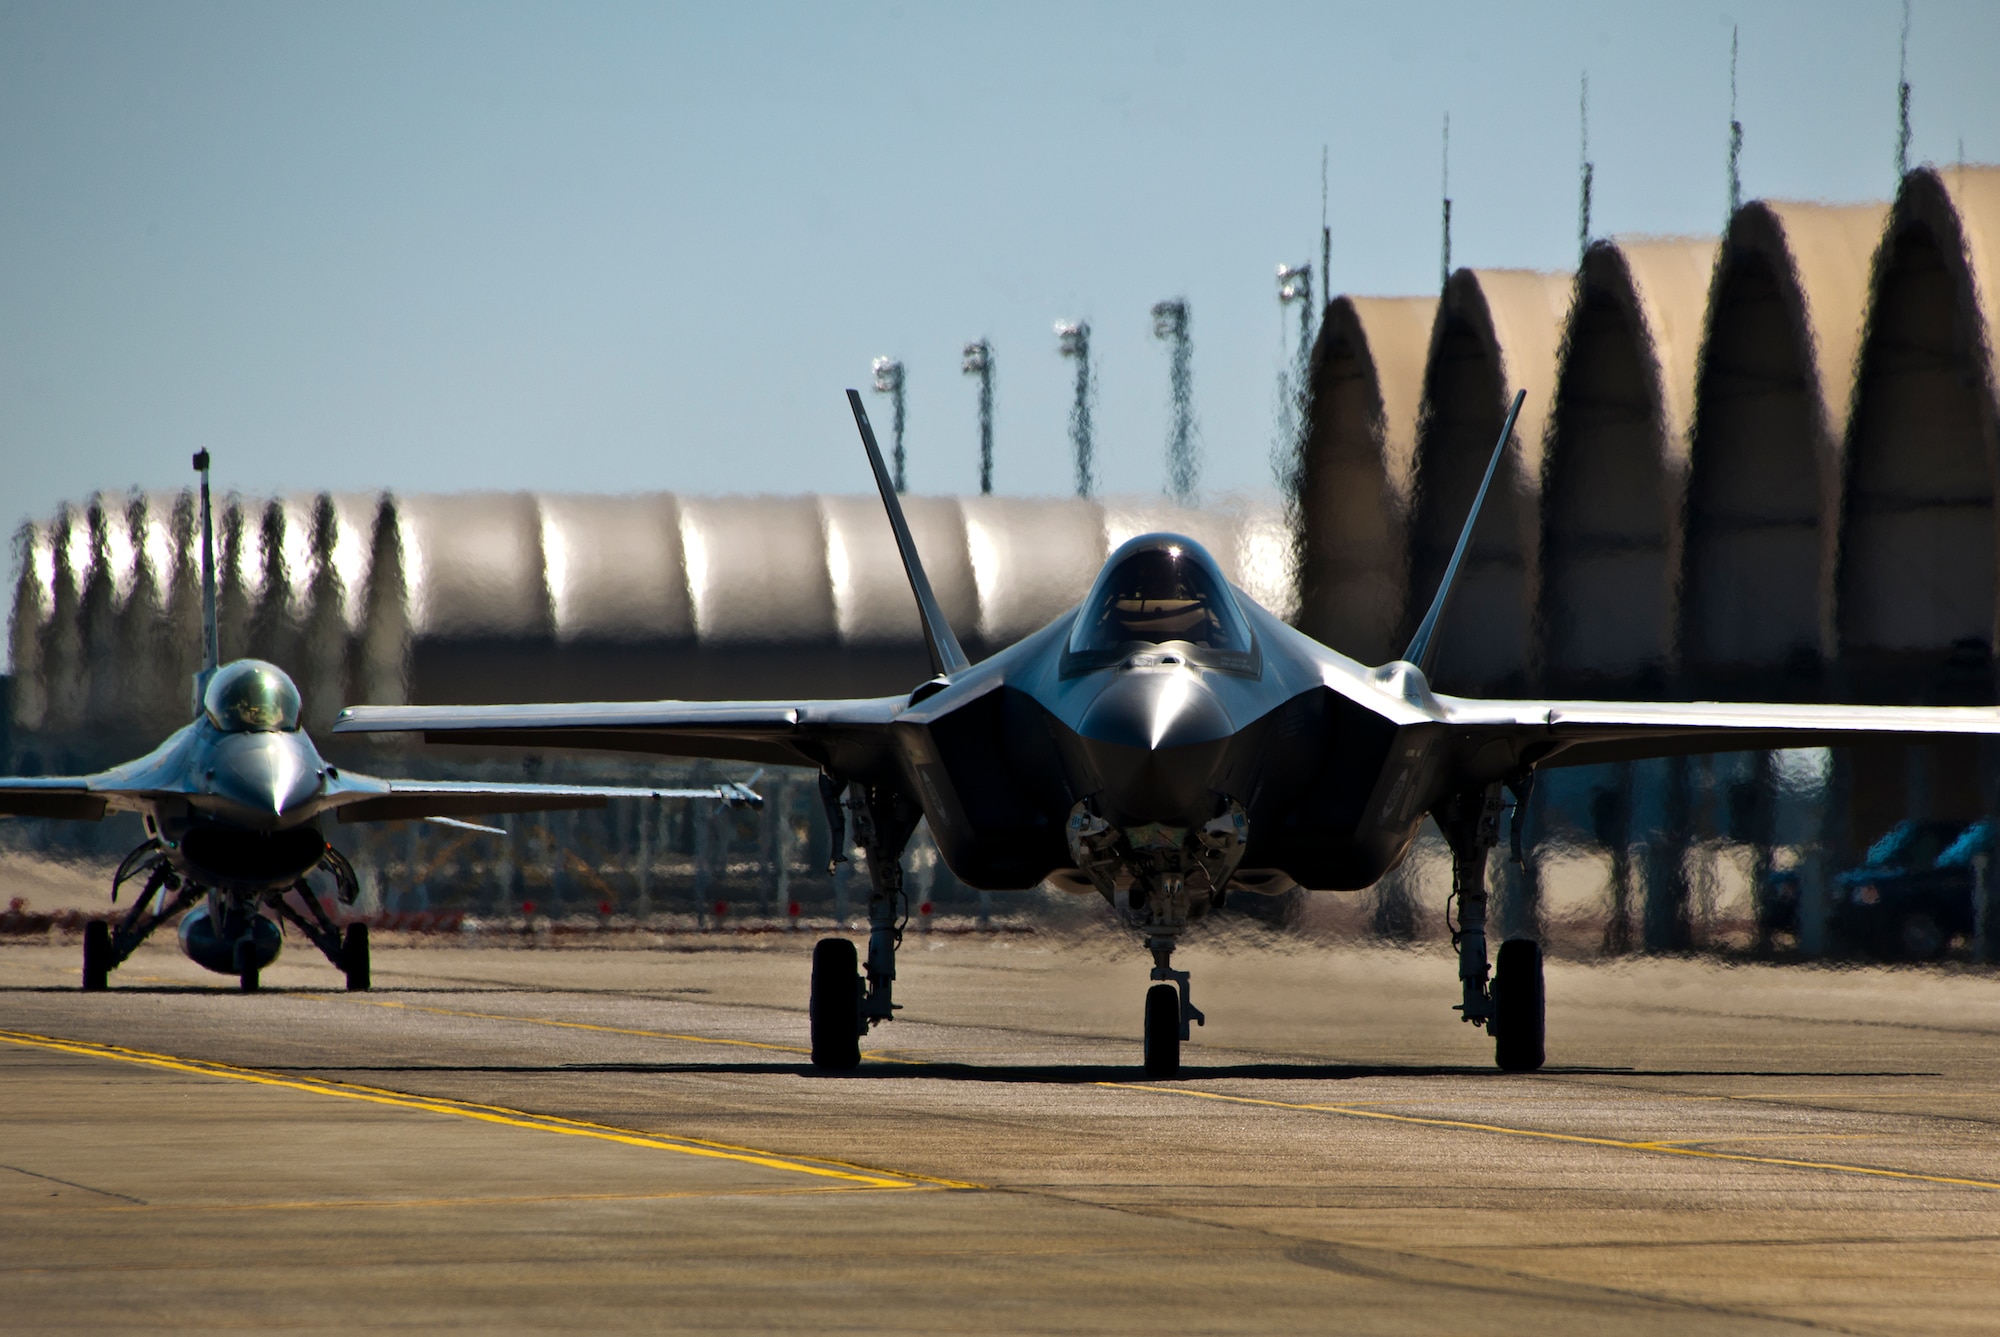 The F-35A Lightning II joint strike fighter taxis out for its first training sortie followed by an F-16 chase aircraft March 6 at Eglin Air Force Base, Fla. (U.S. Air Force photo/Samuel King Jr.)